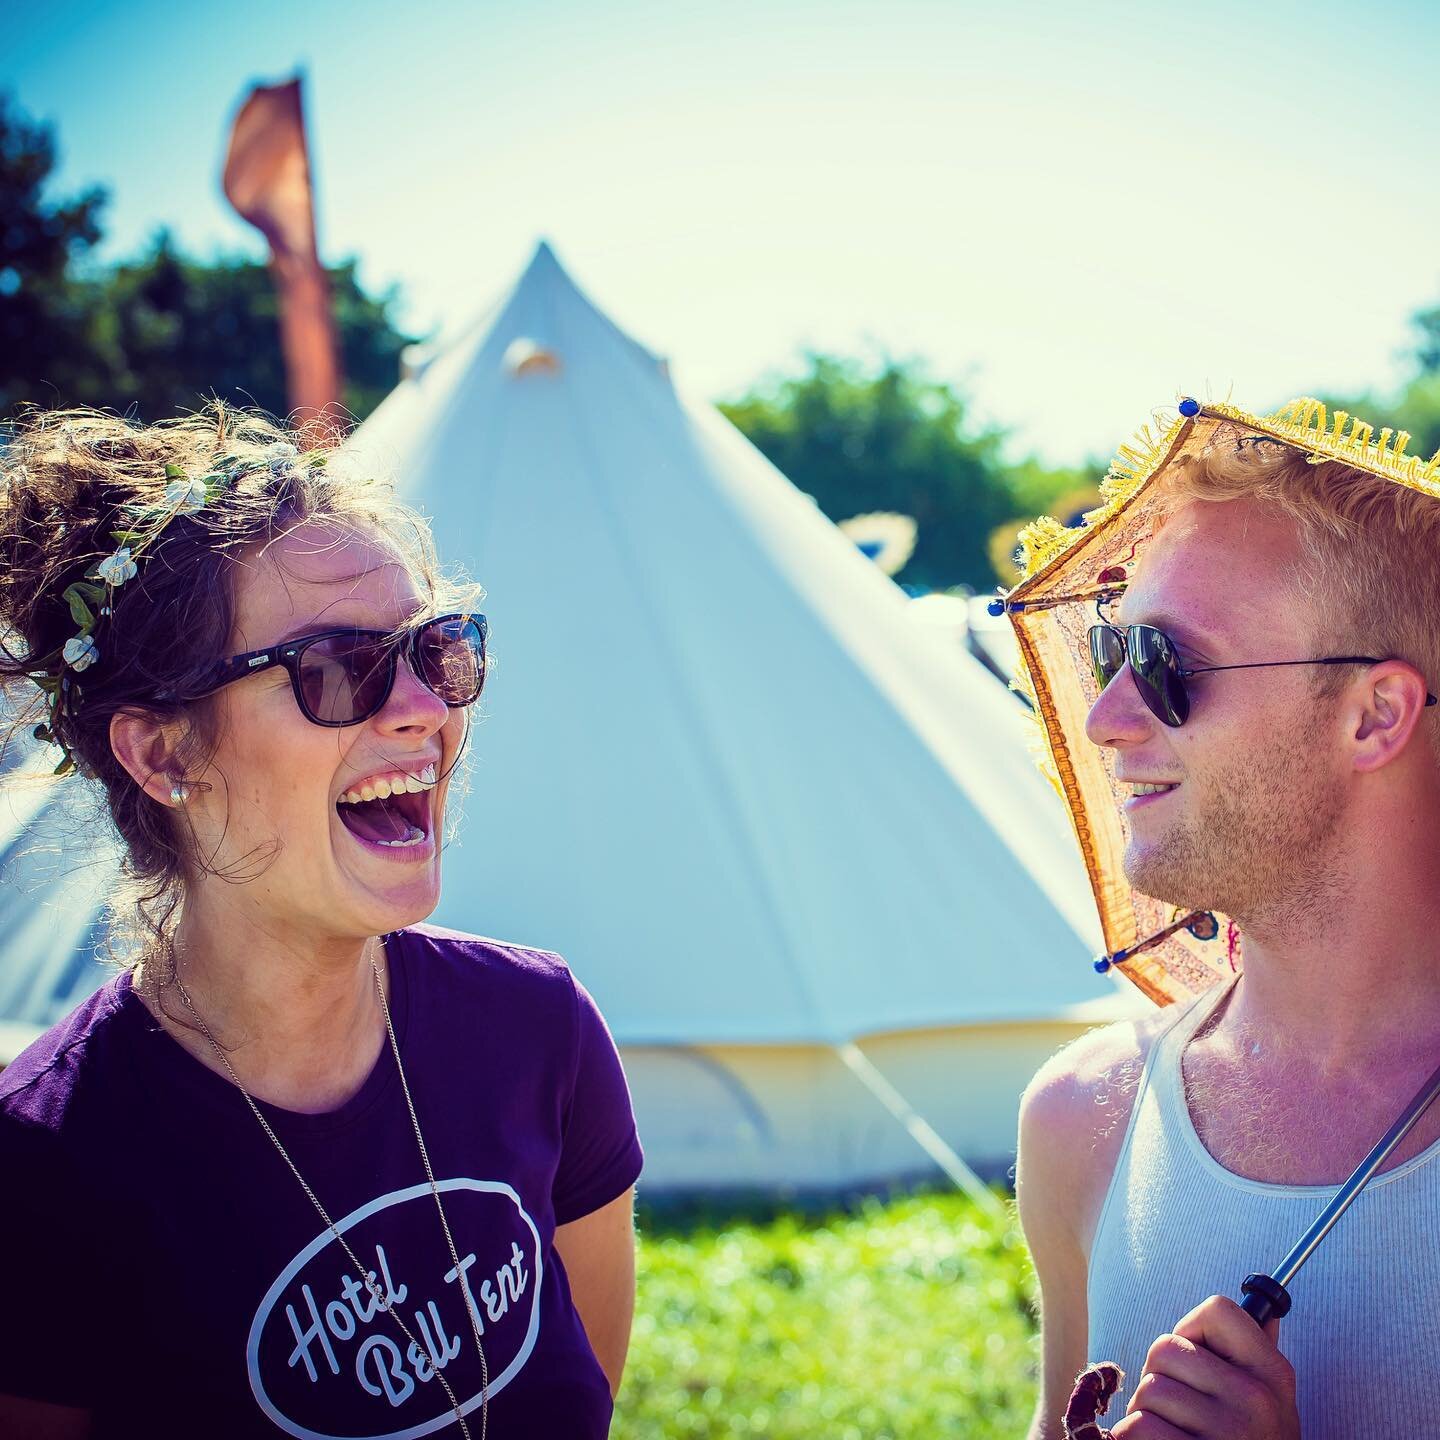 We are now hiring Front of House and Build &amp; Break crew for 2020! If you or a friend are interested in joining Hotel Bell Tent at the UK&rsquo;s best music festivals and sporting events this summer, please apply via the link in our bio. ☀️🏕#hote